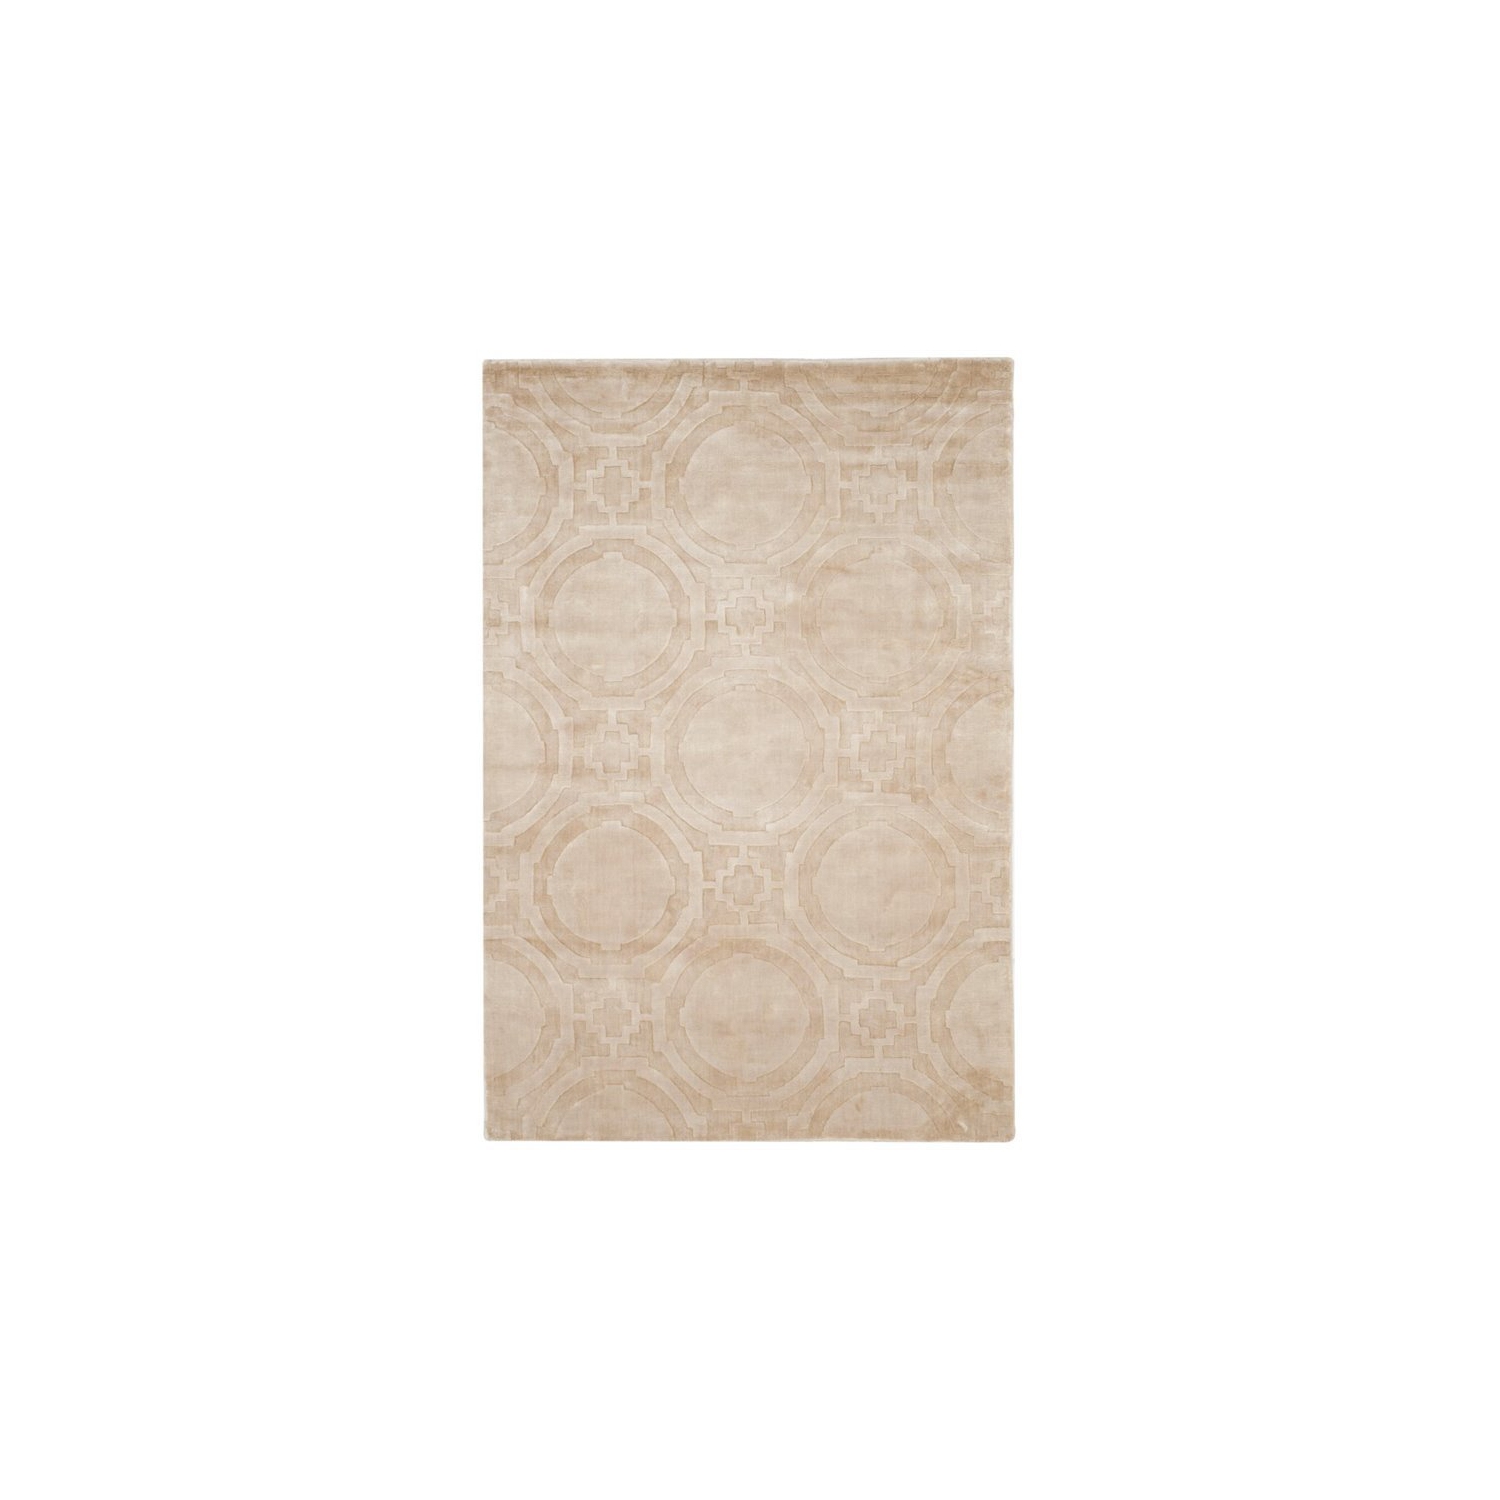 Safavieh Mirage 4' X 6' Loom Knotted Viscose Pile Rug in Beige